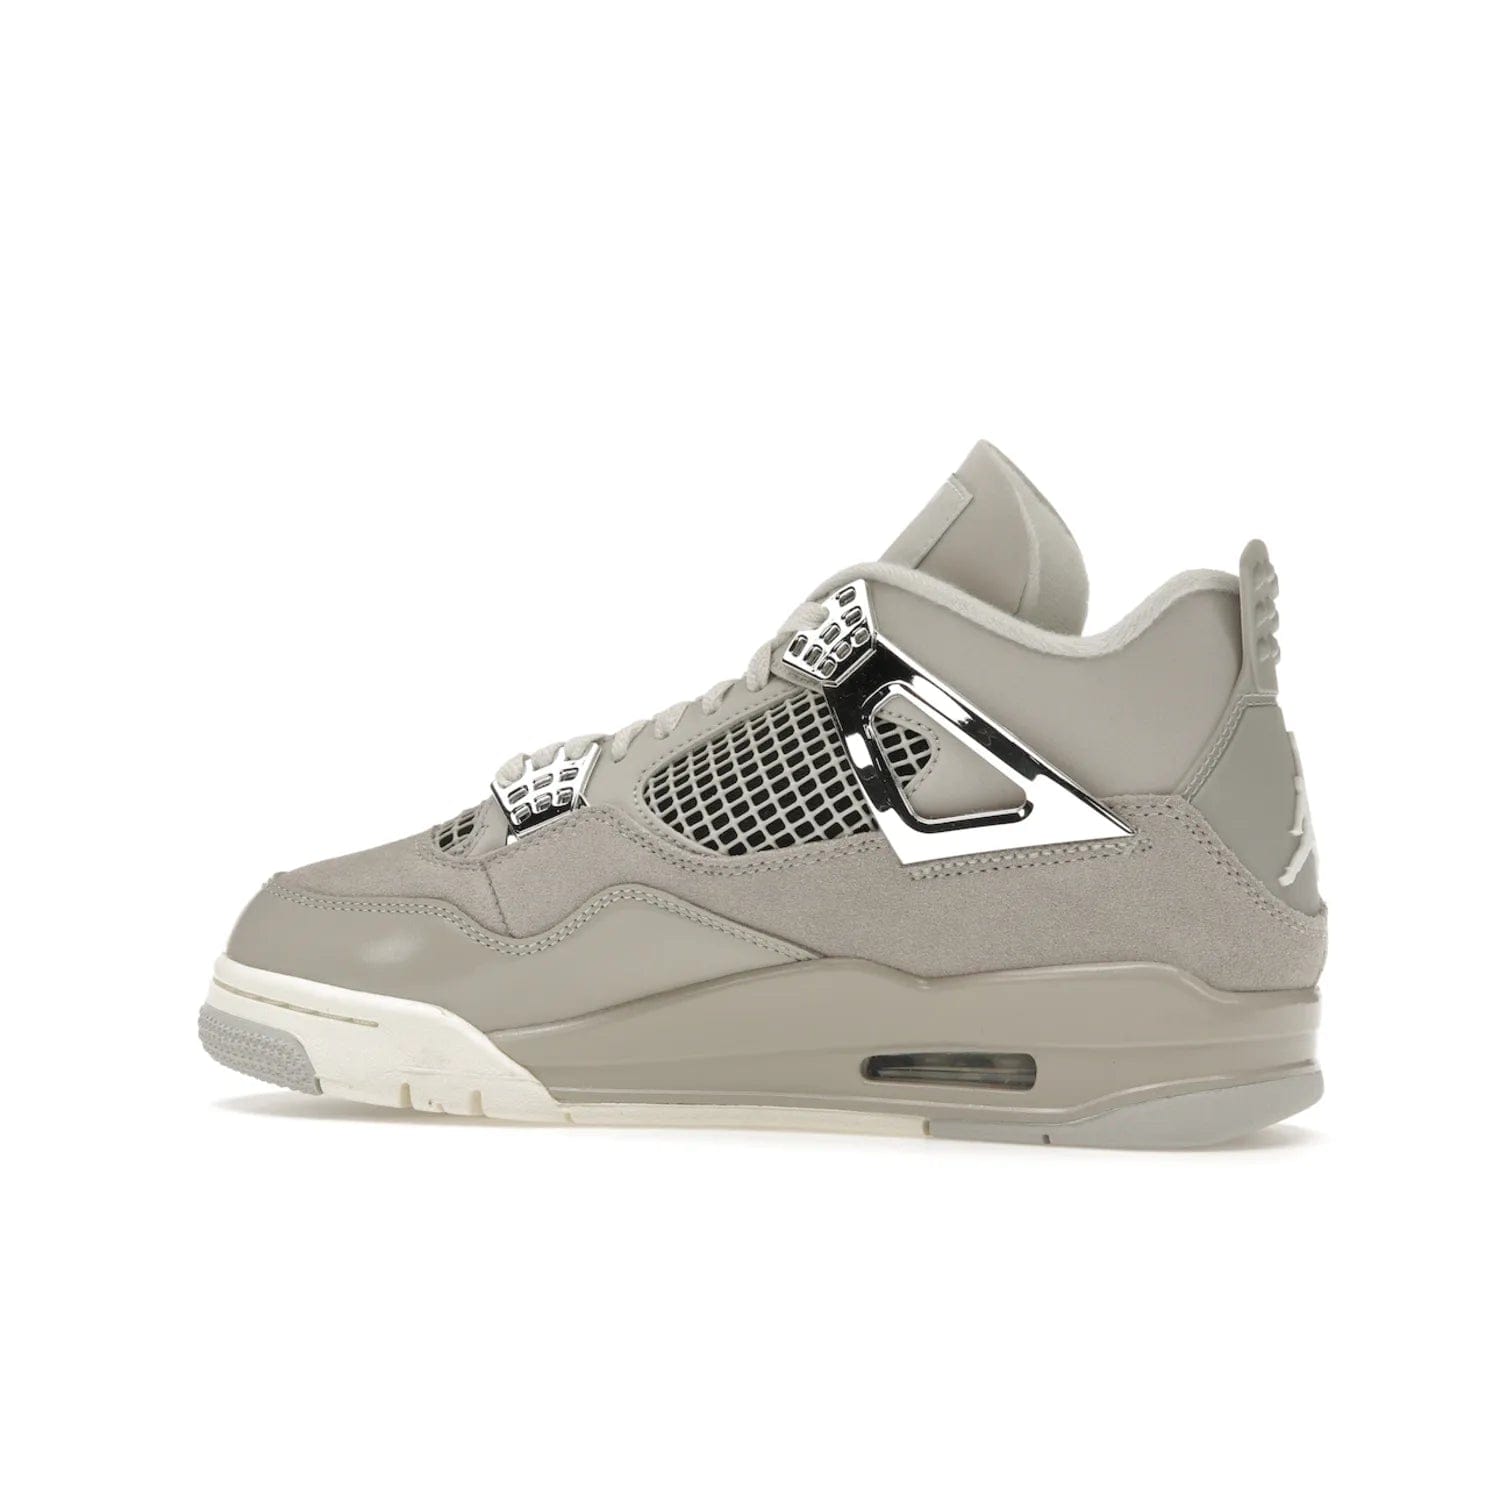 Jordan 4 Retro Frozen Moments (Women's) - Image 21 - Only at www.BallersClubKickz.com - The Jordan 4 Retro Frozen Moments is a stylish blend of classic design elements and modern tones. Featuring suede and leather overlays in a light iron-ore, sail, neutral grey, black, and metallic silver colorway. Get this iconic high-performance sneaker for $210.